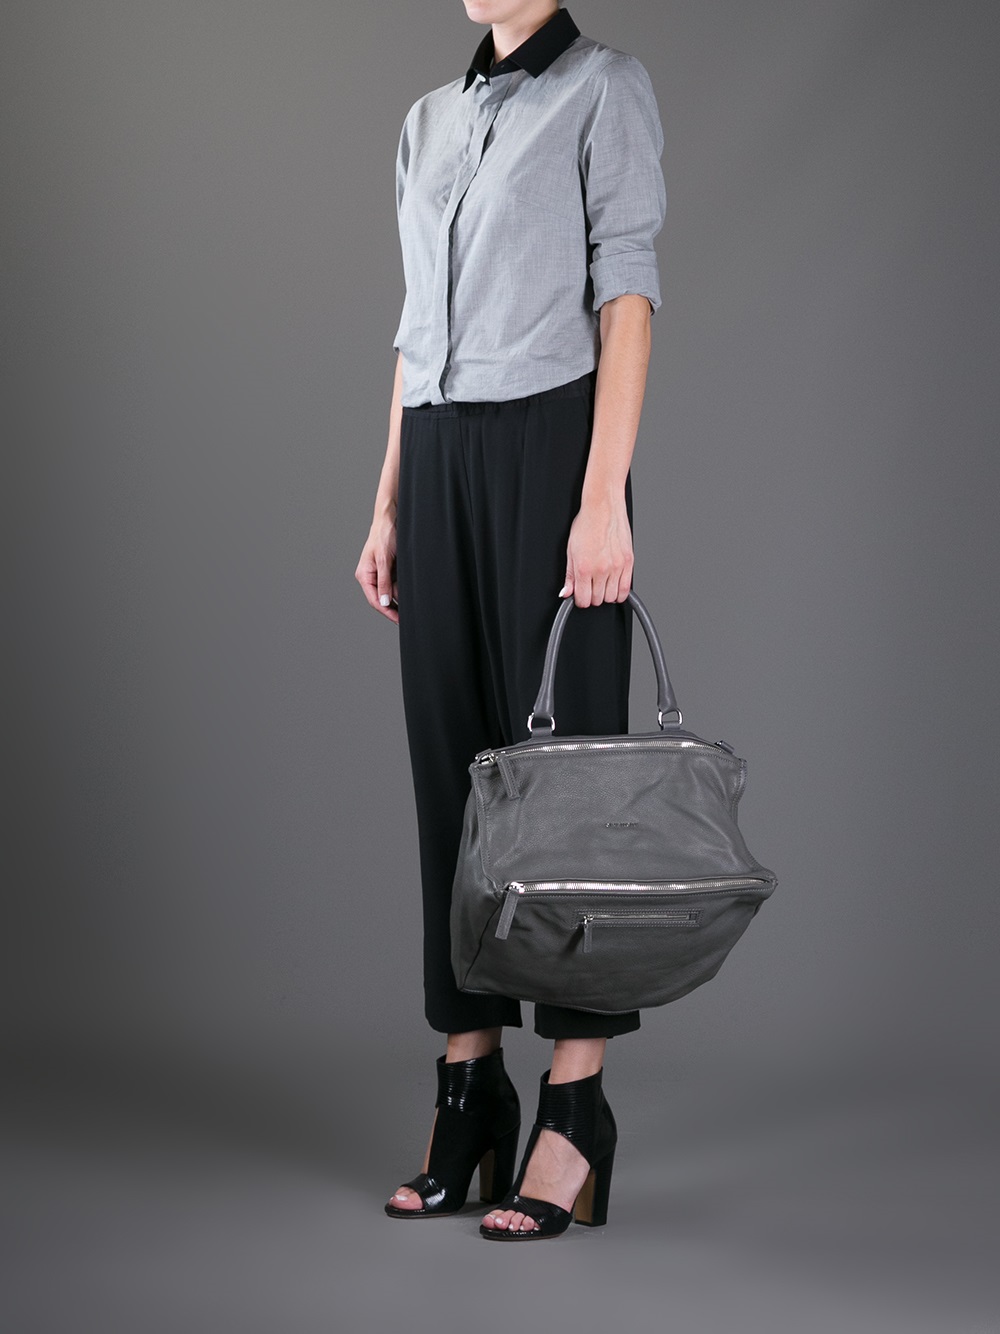 Givenchy Pandora Large Bag in Gray | Lyst